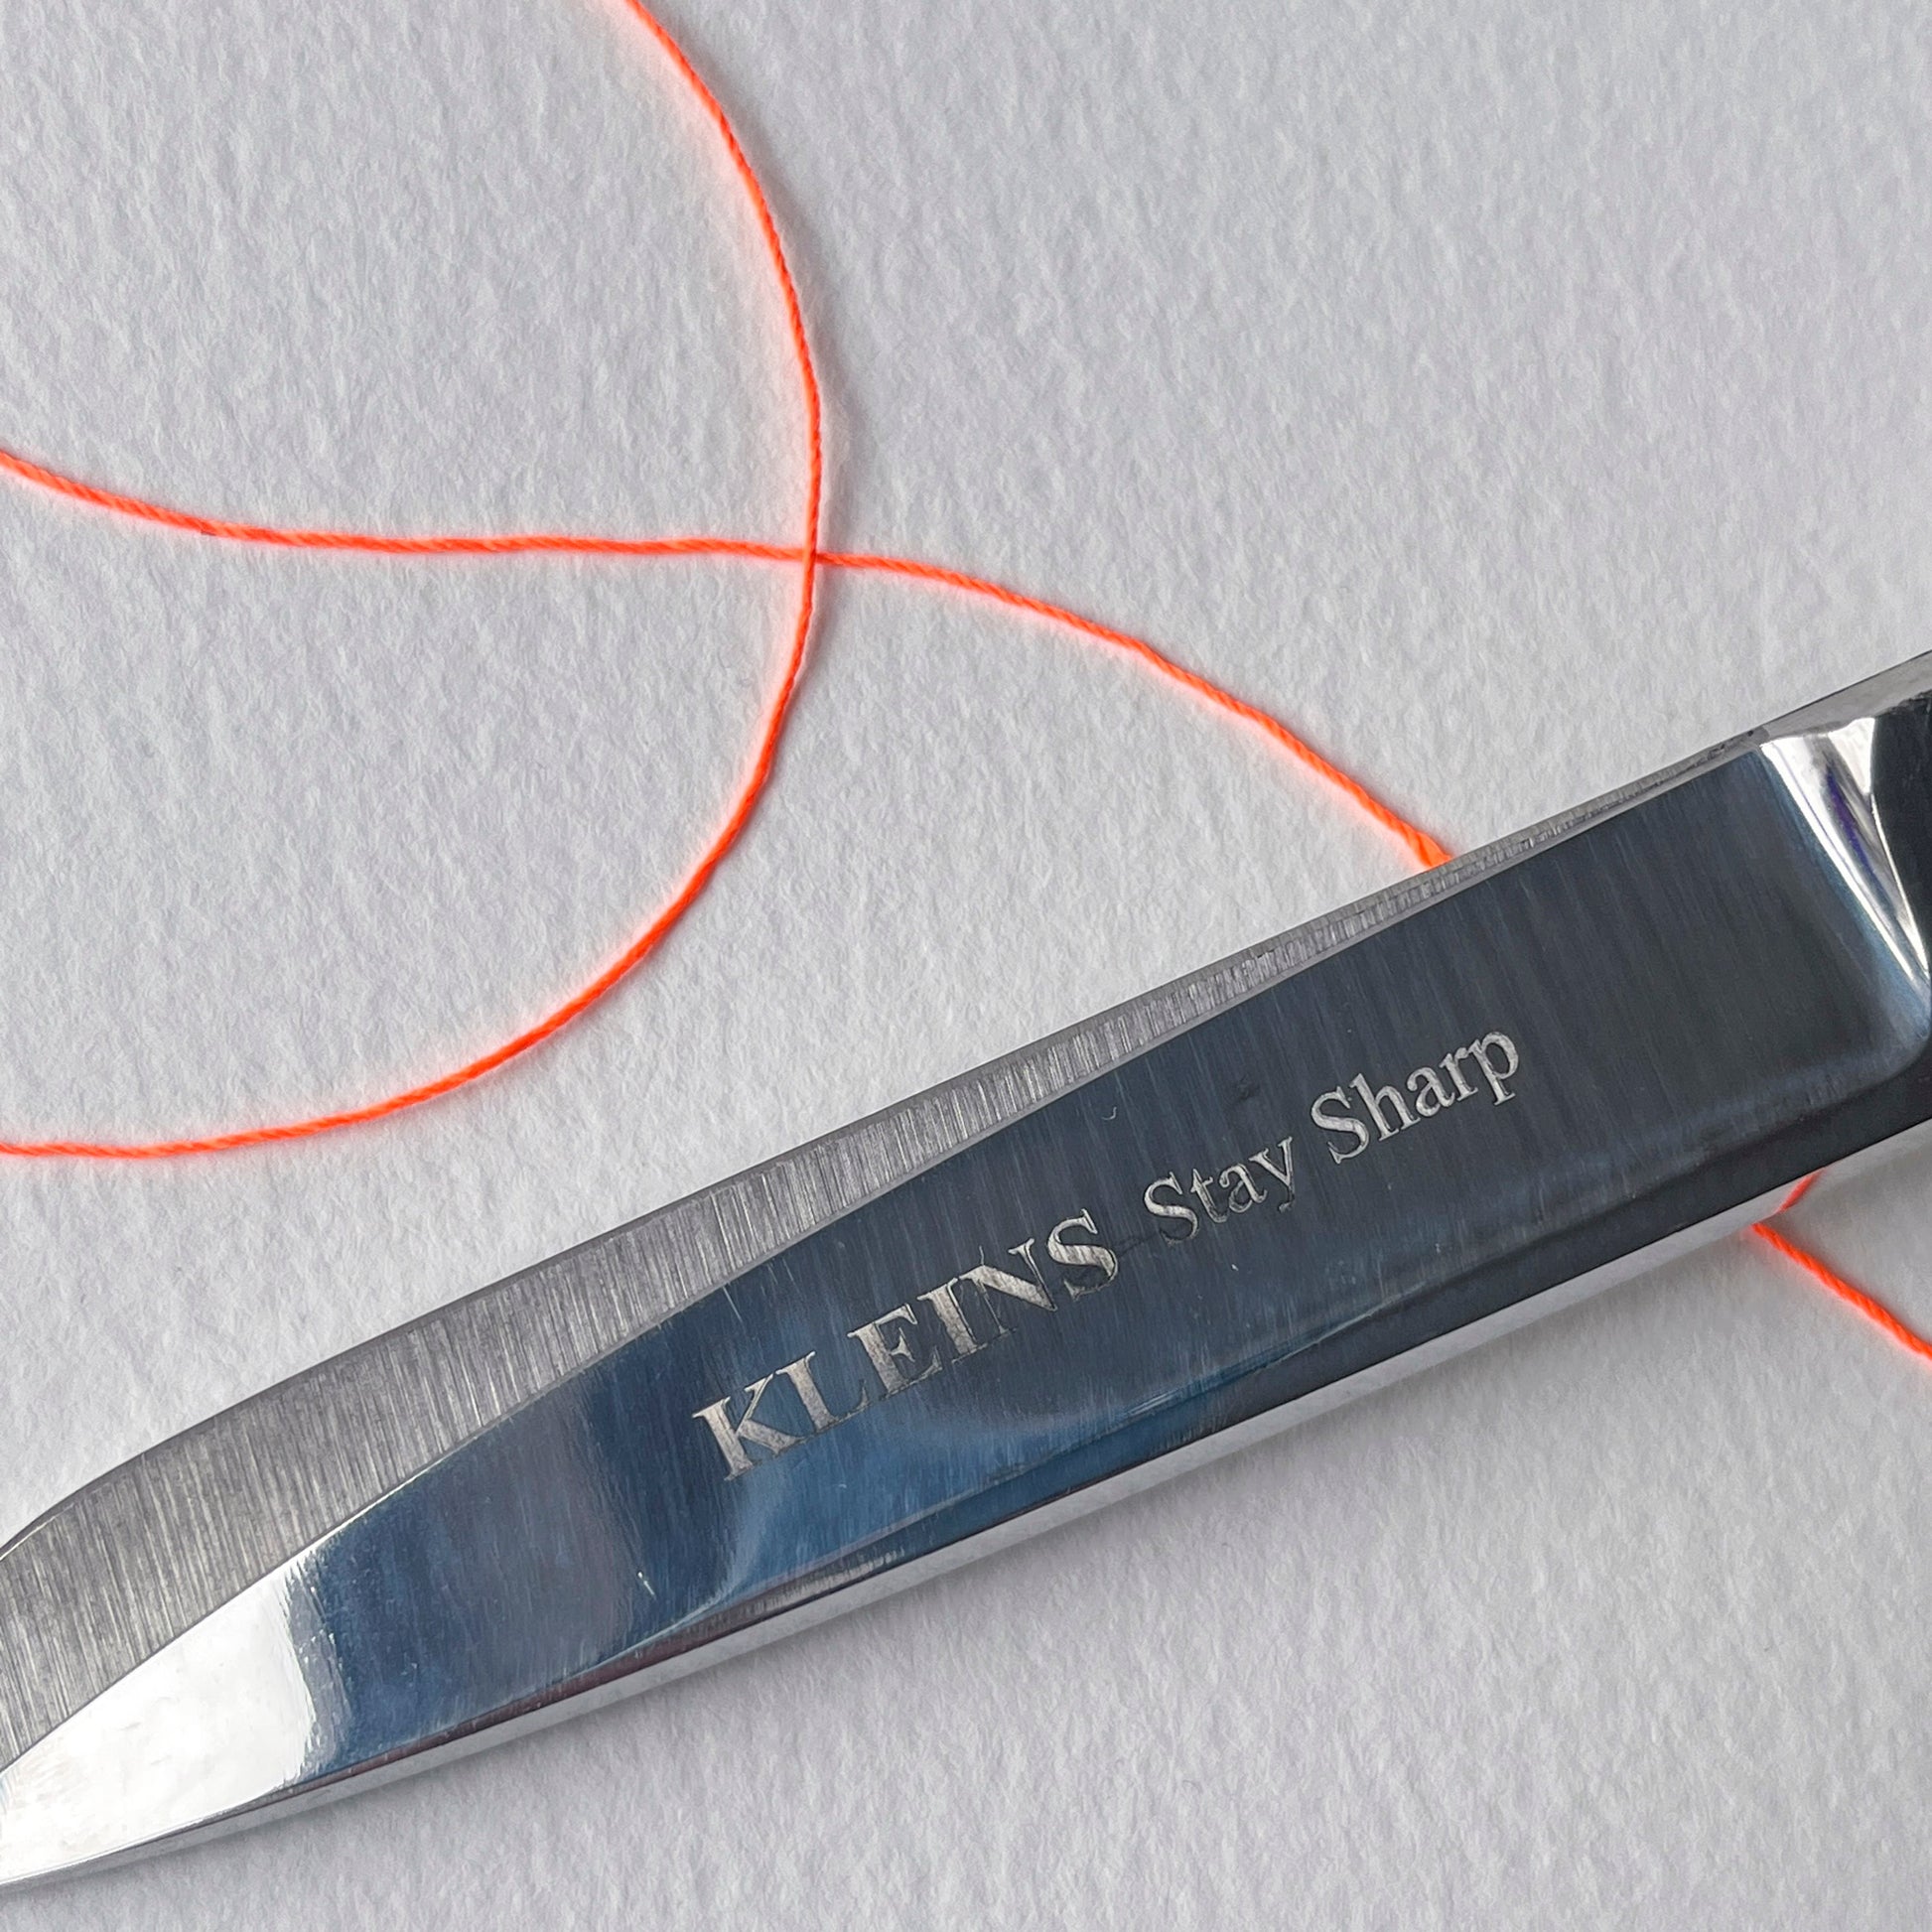 20cm / 8" tailoring shears, Kleins stay sharp brand and excellent for professional or domestic sewing.